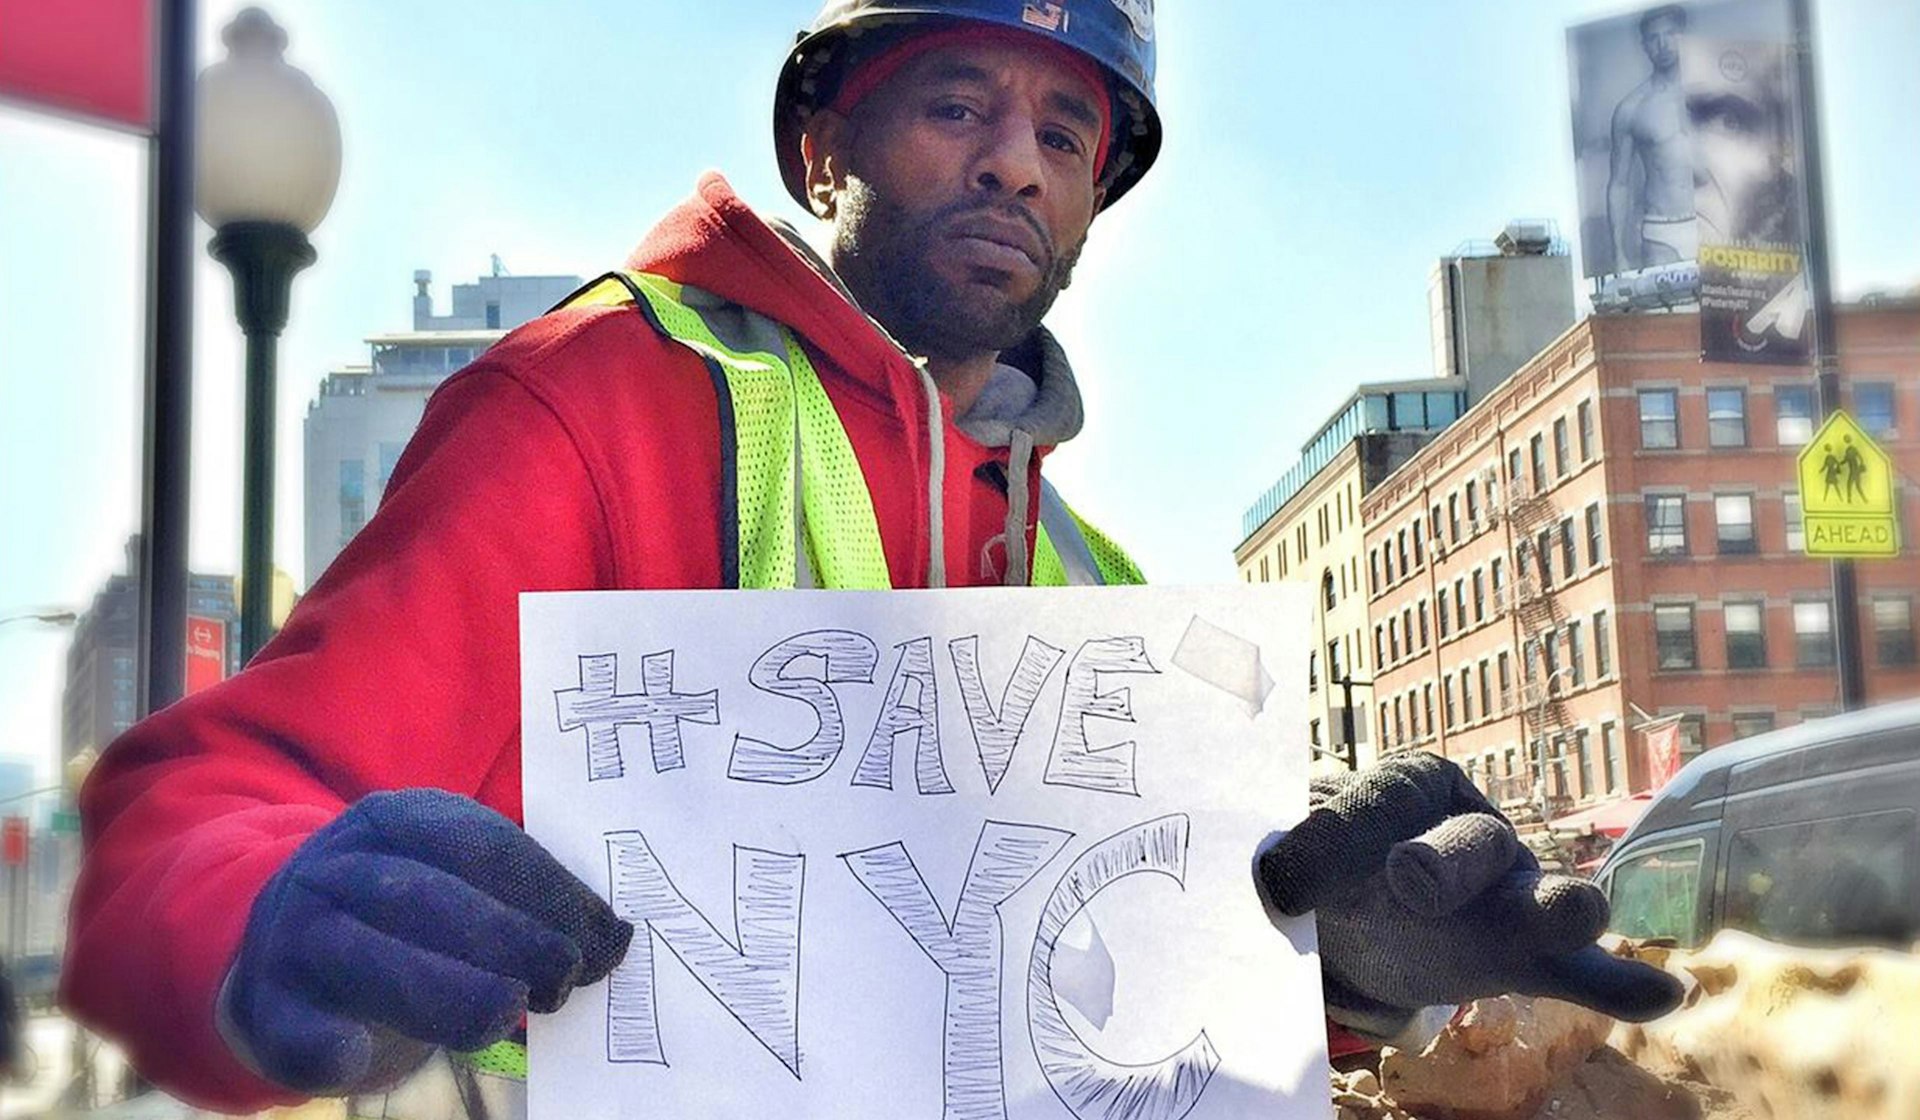 New Yorkers are fighting to save the soul of their city